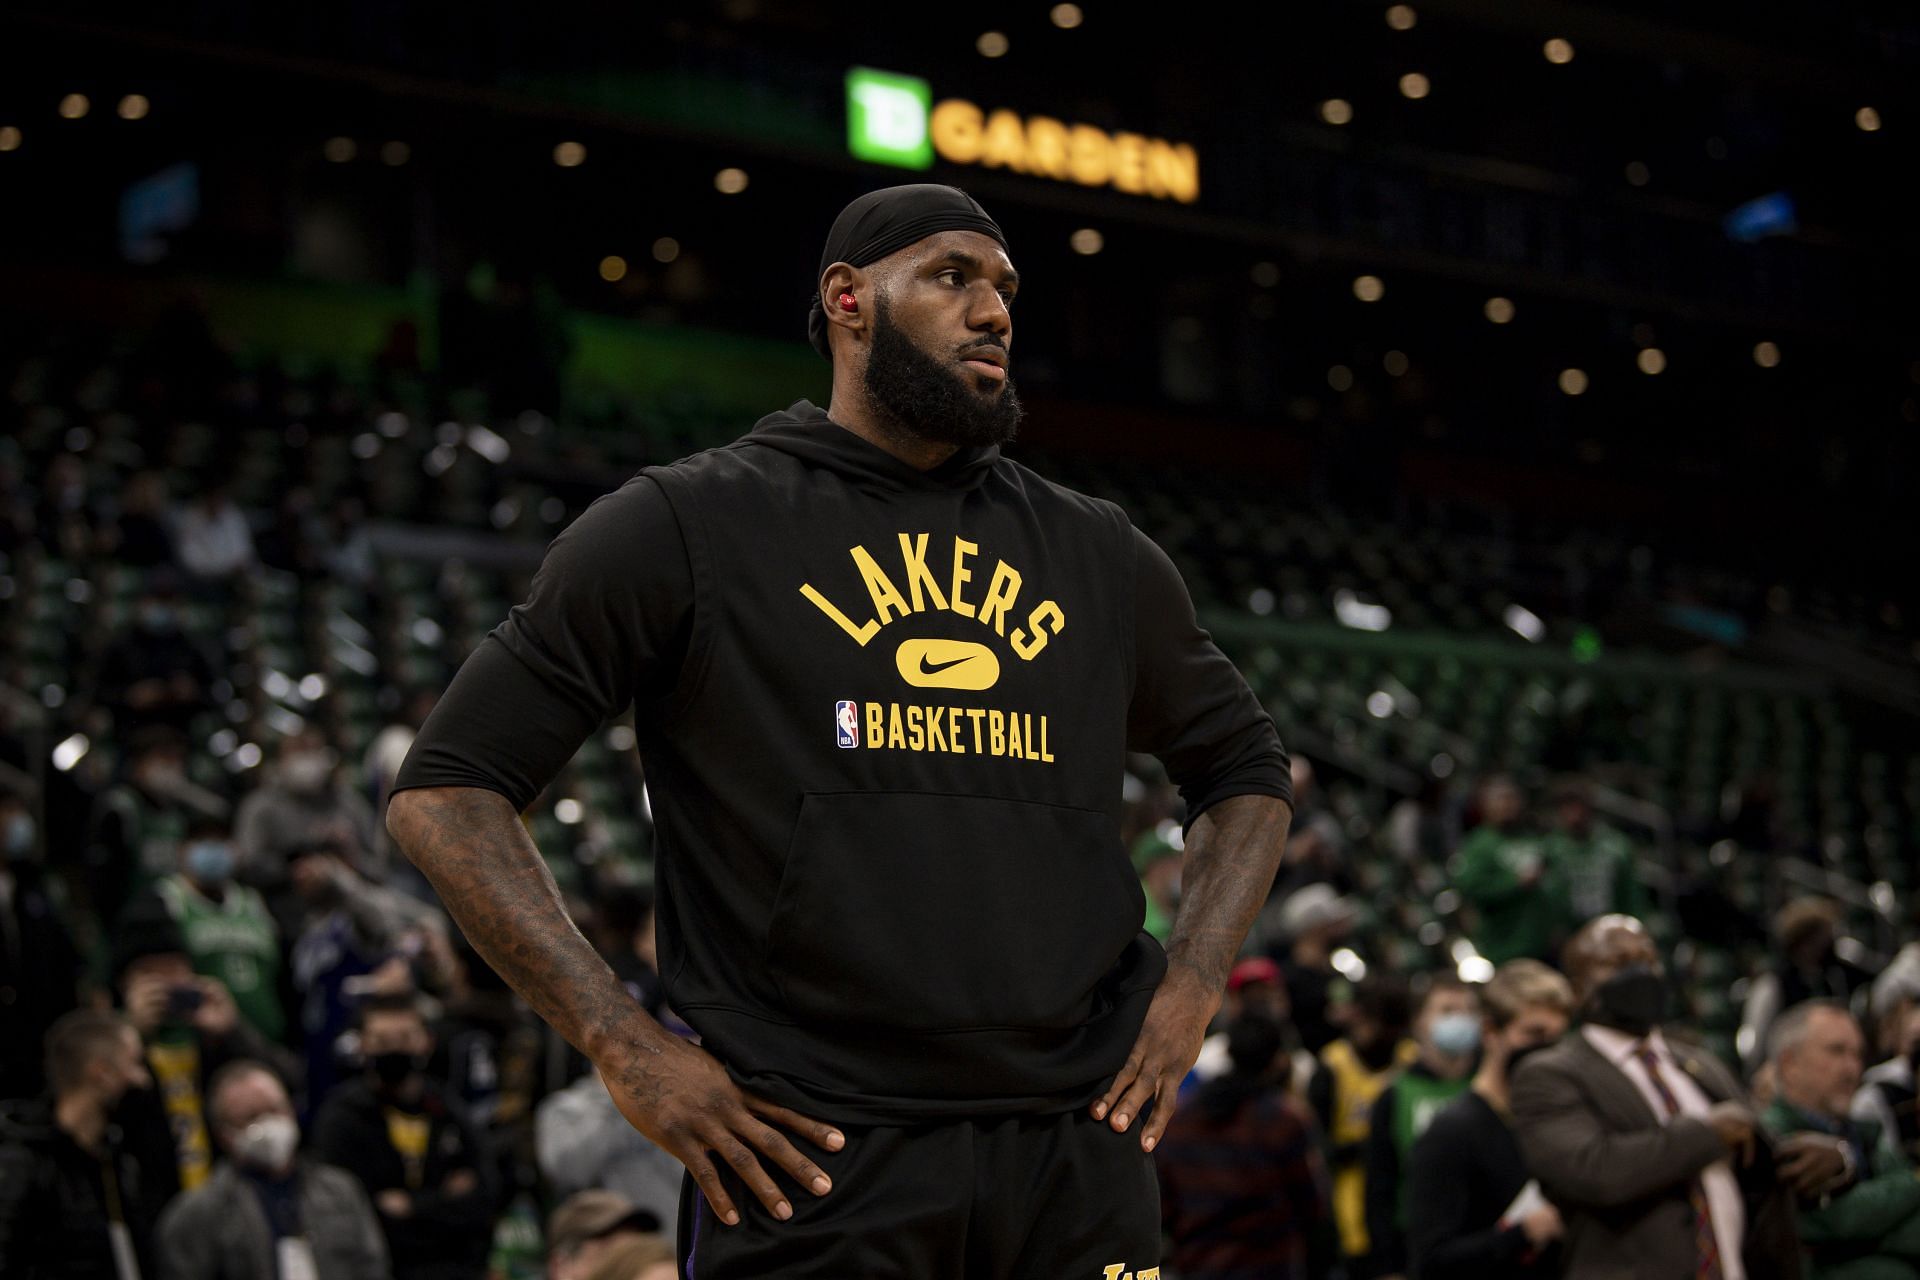 LeBron James and the LA Lakers are off to a poor start in the 2021-22 NBA season